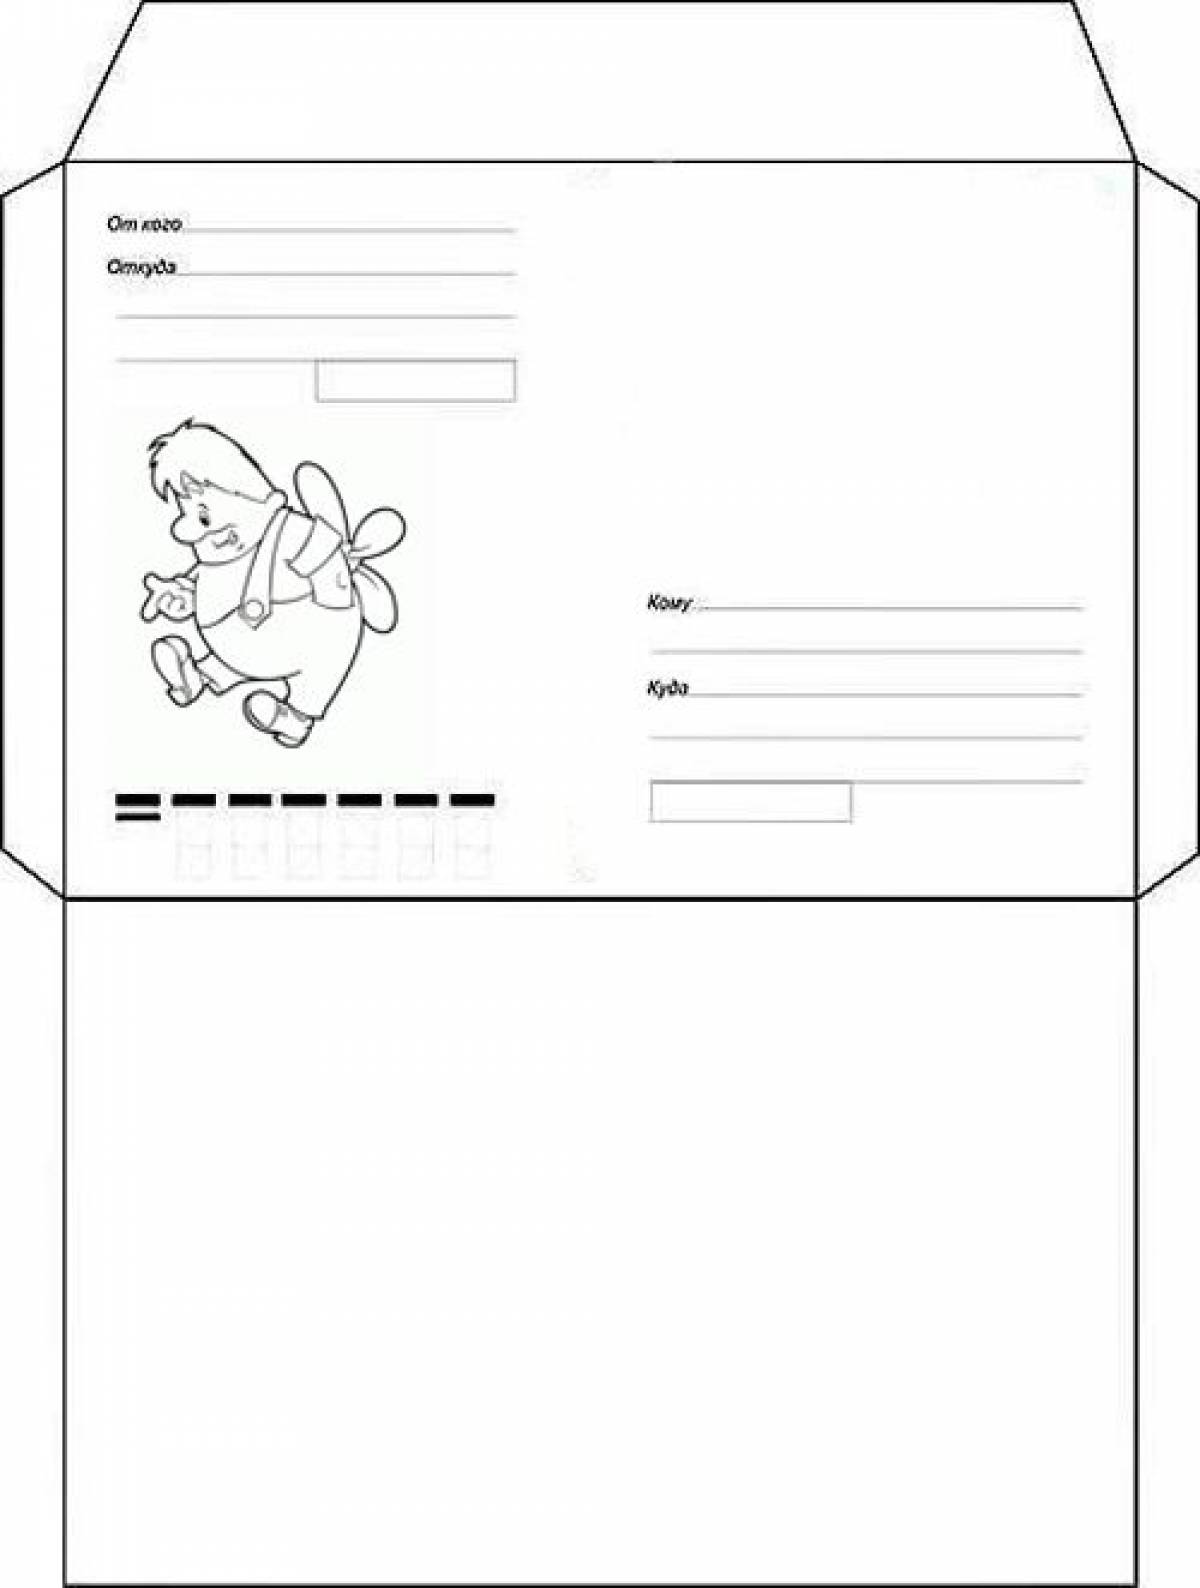 Envelope coloring page